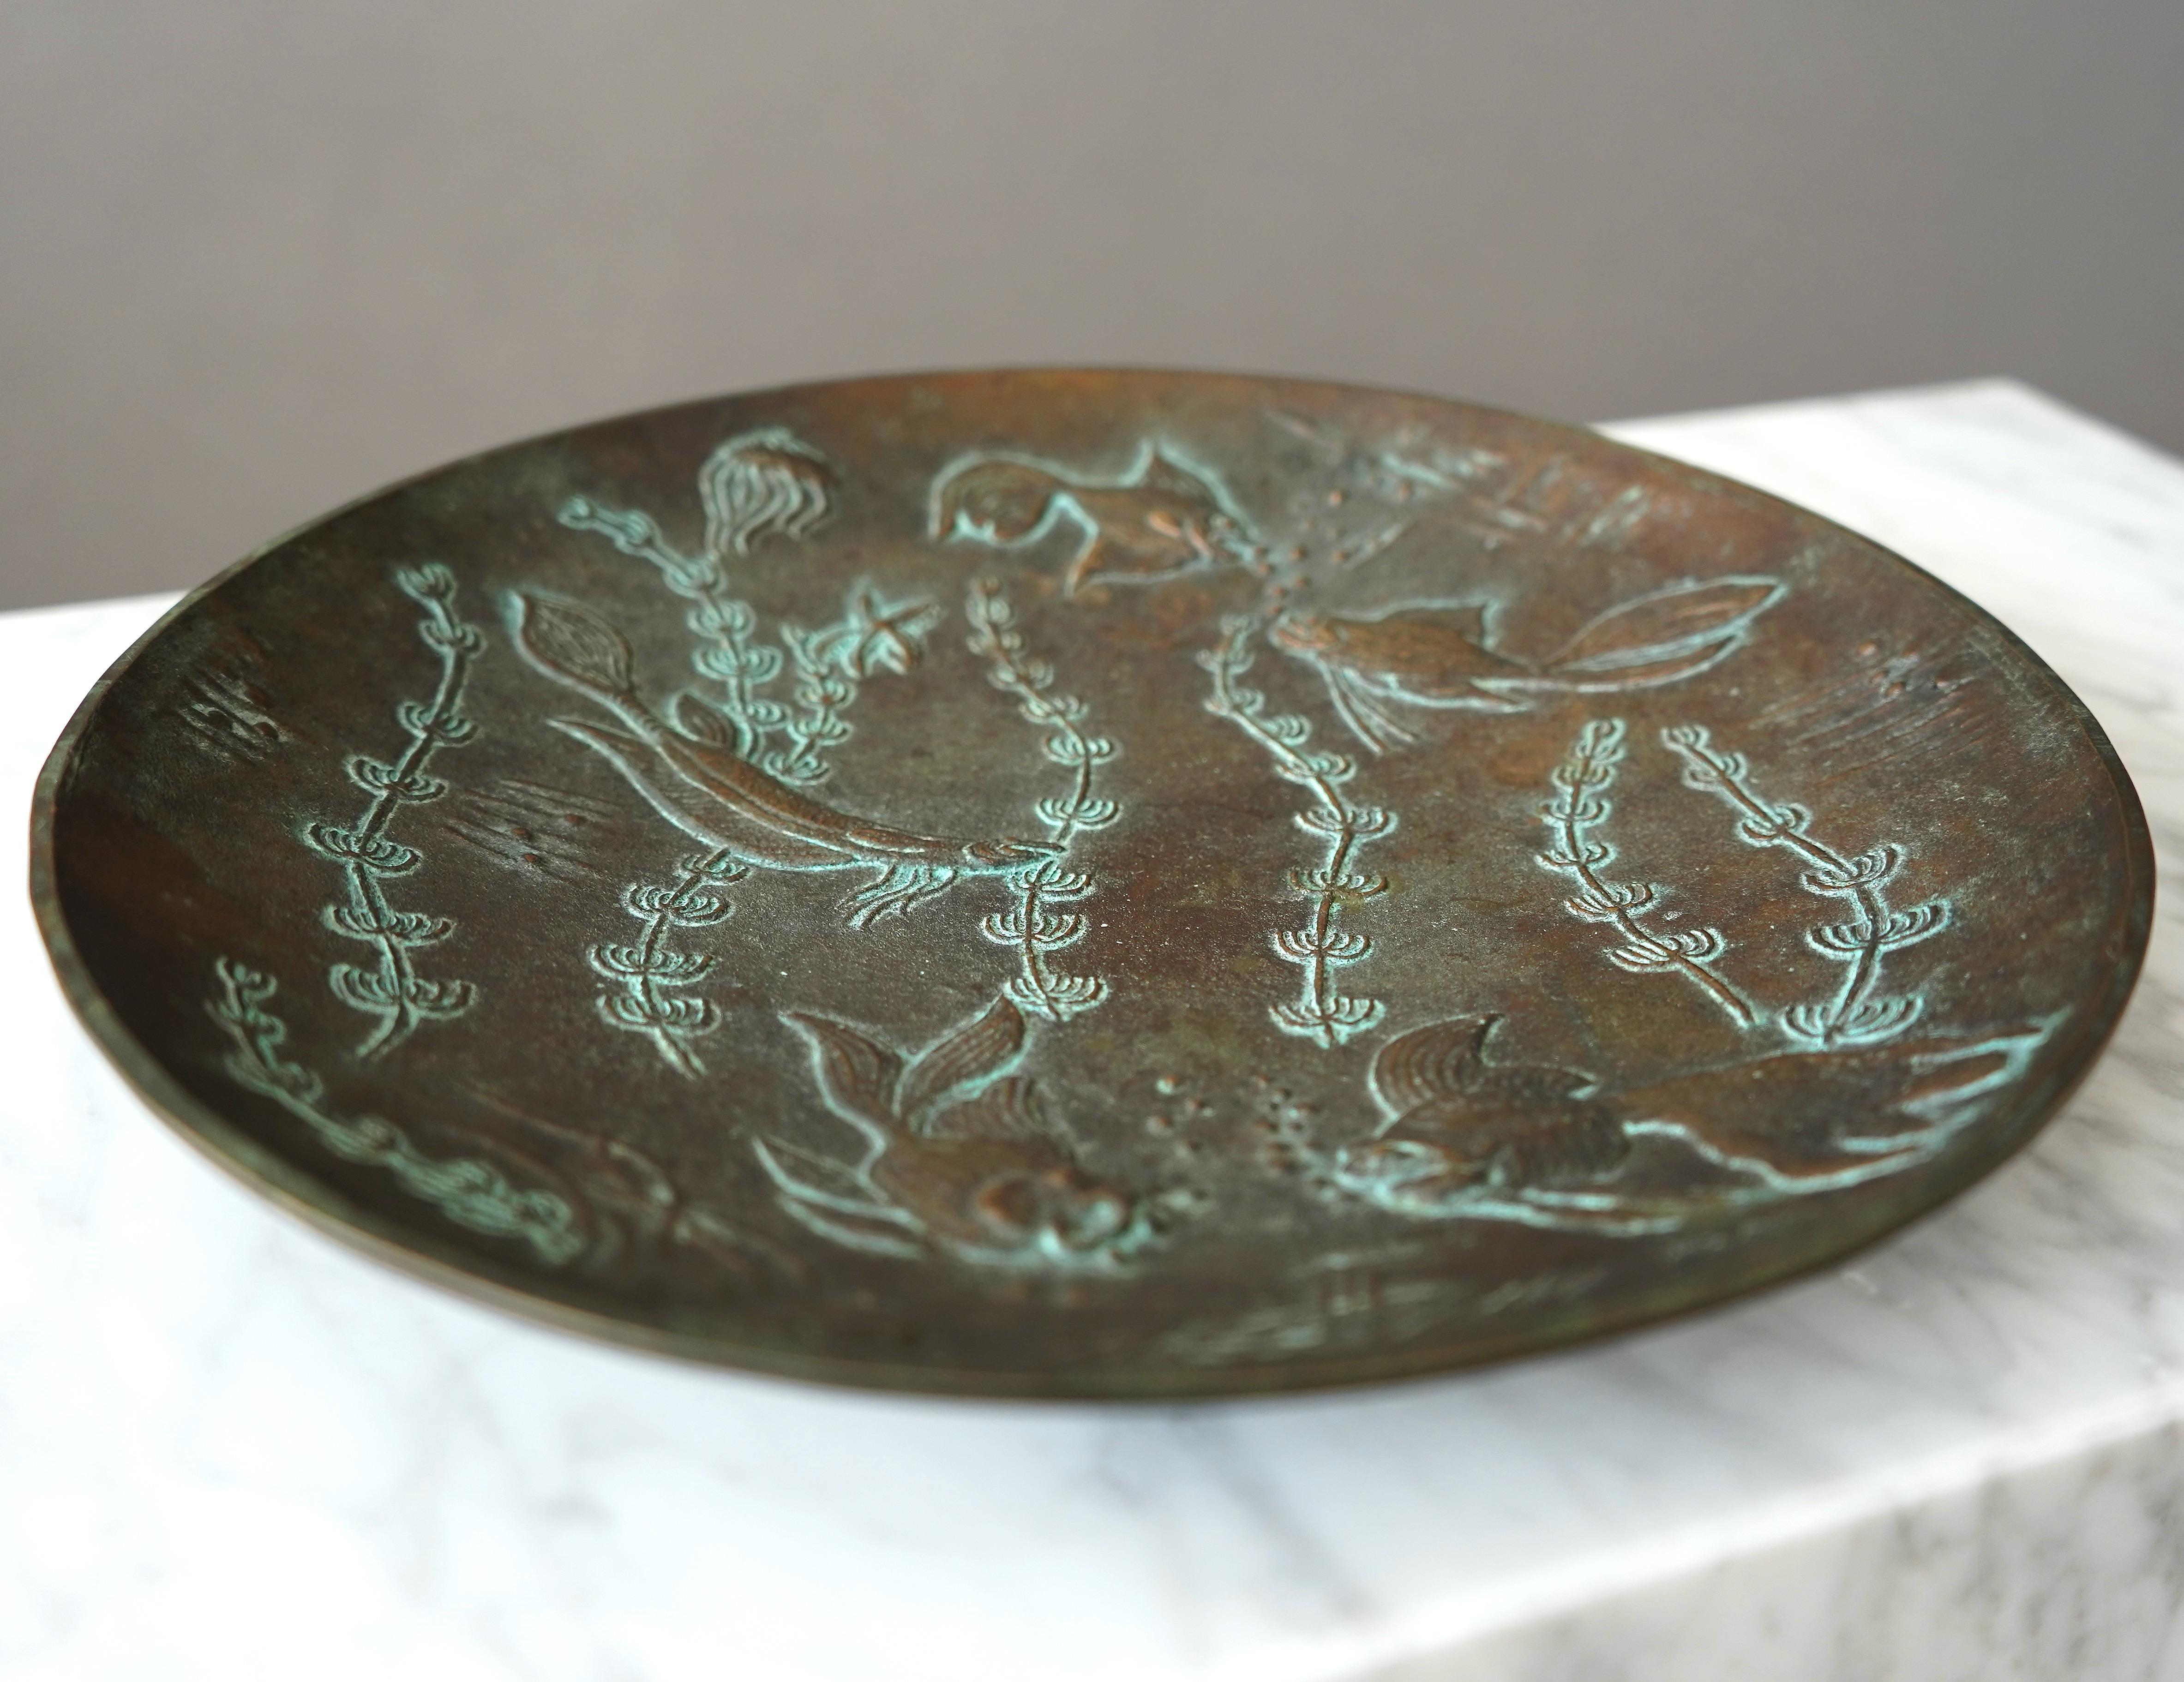 A beautiful art deco bronze bowl with amazing patina. 
Designed by Gunnar Nylund for Äkta Brons, Sweden, 1940s.

Excellent condition. Initials 'G.N.' on the front. Stamped 'ÄKTA BRONS' and an Alladins lamp on the back.

Gunnar Nylund (1904-1997) was